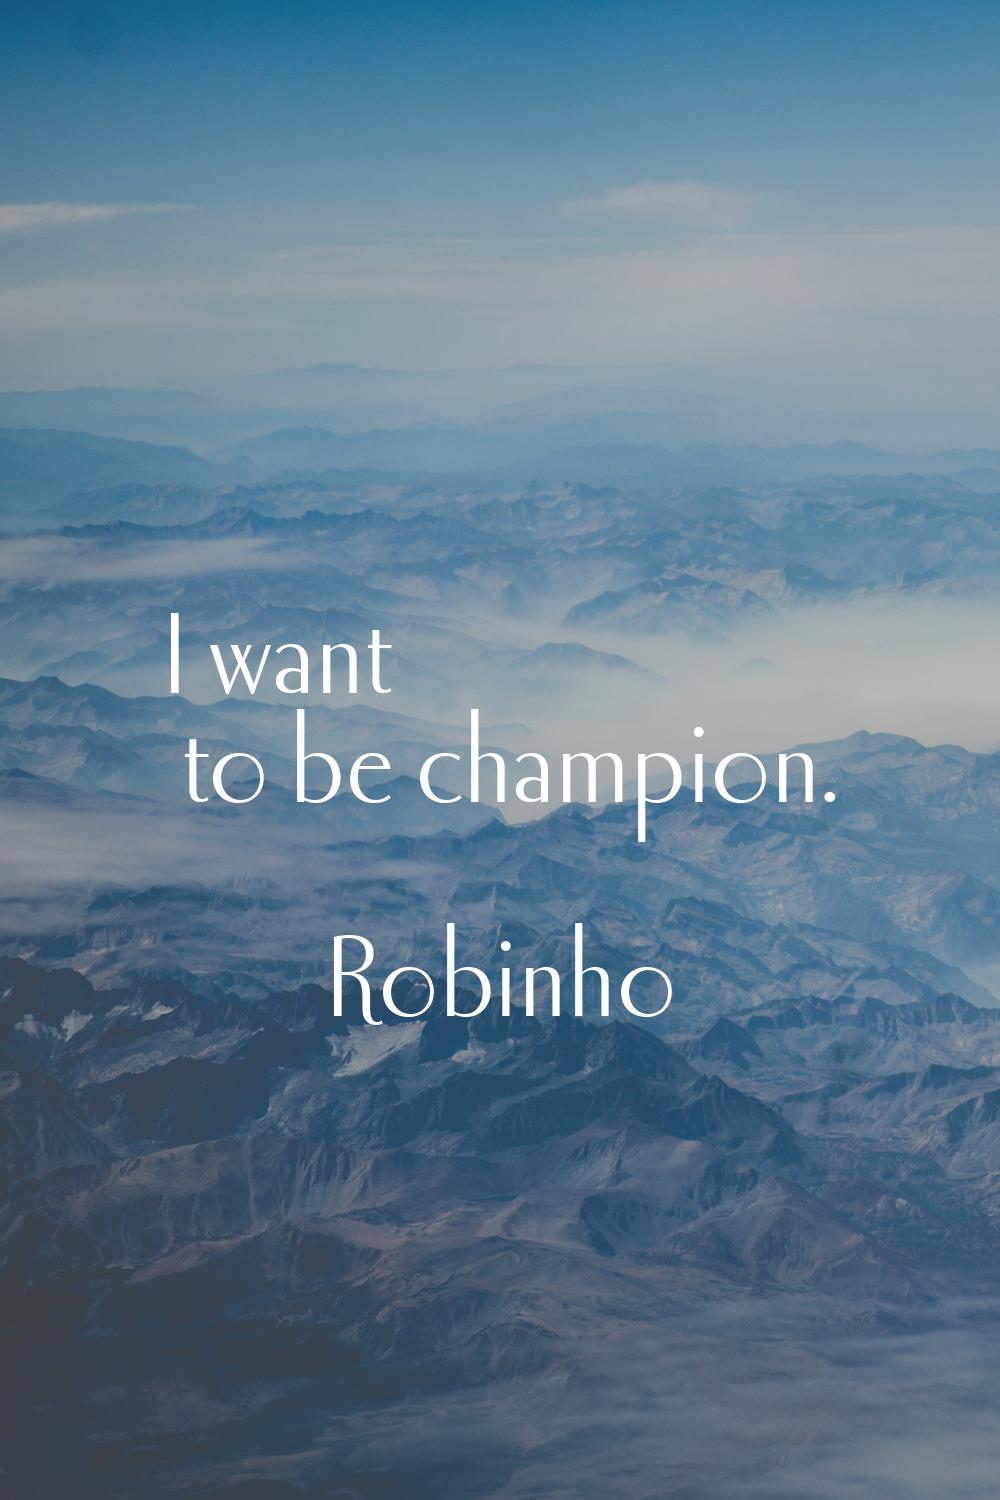 I want to be champion.